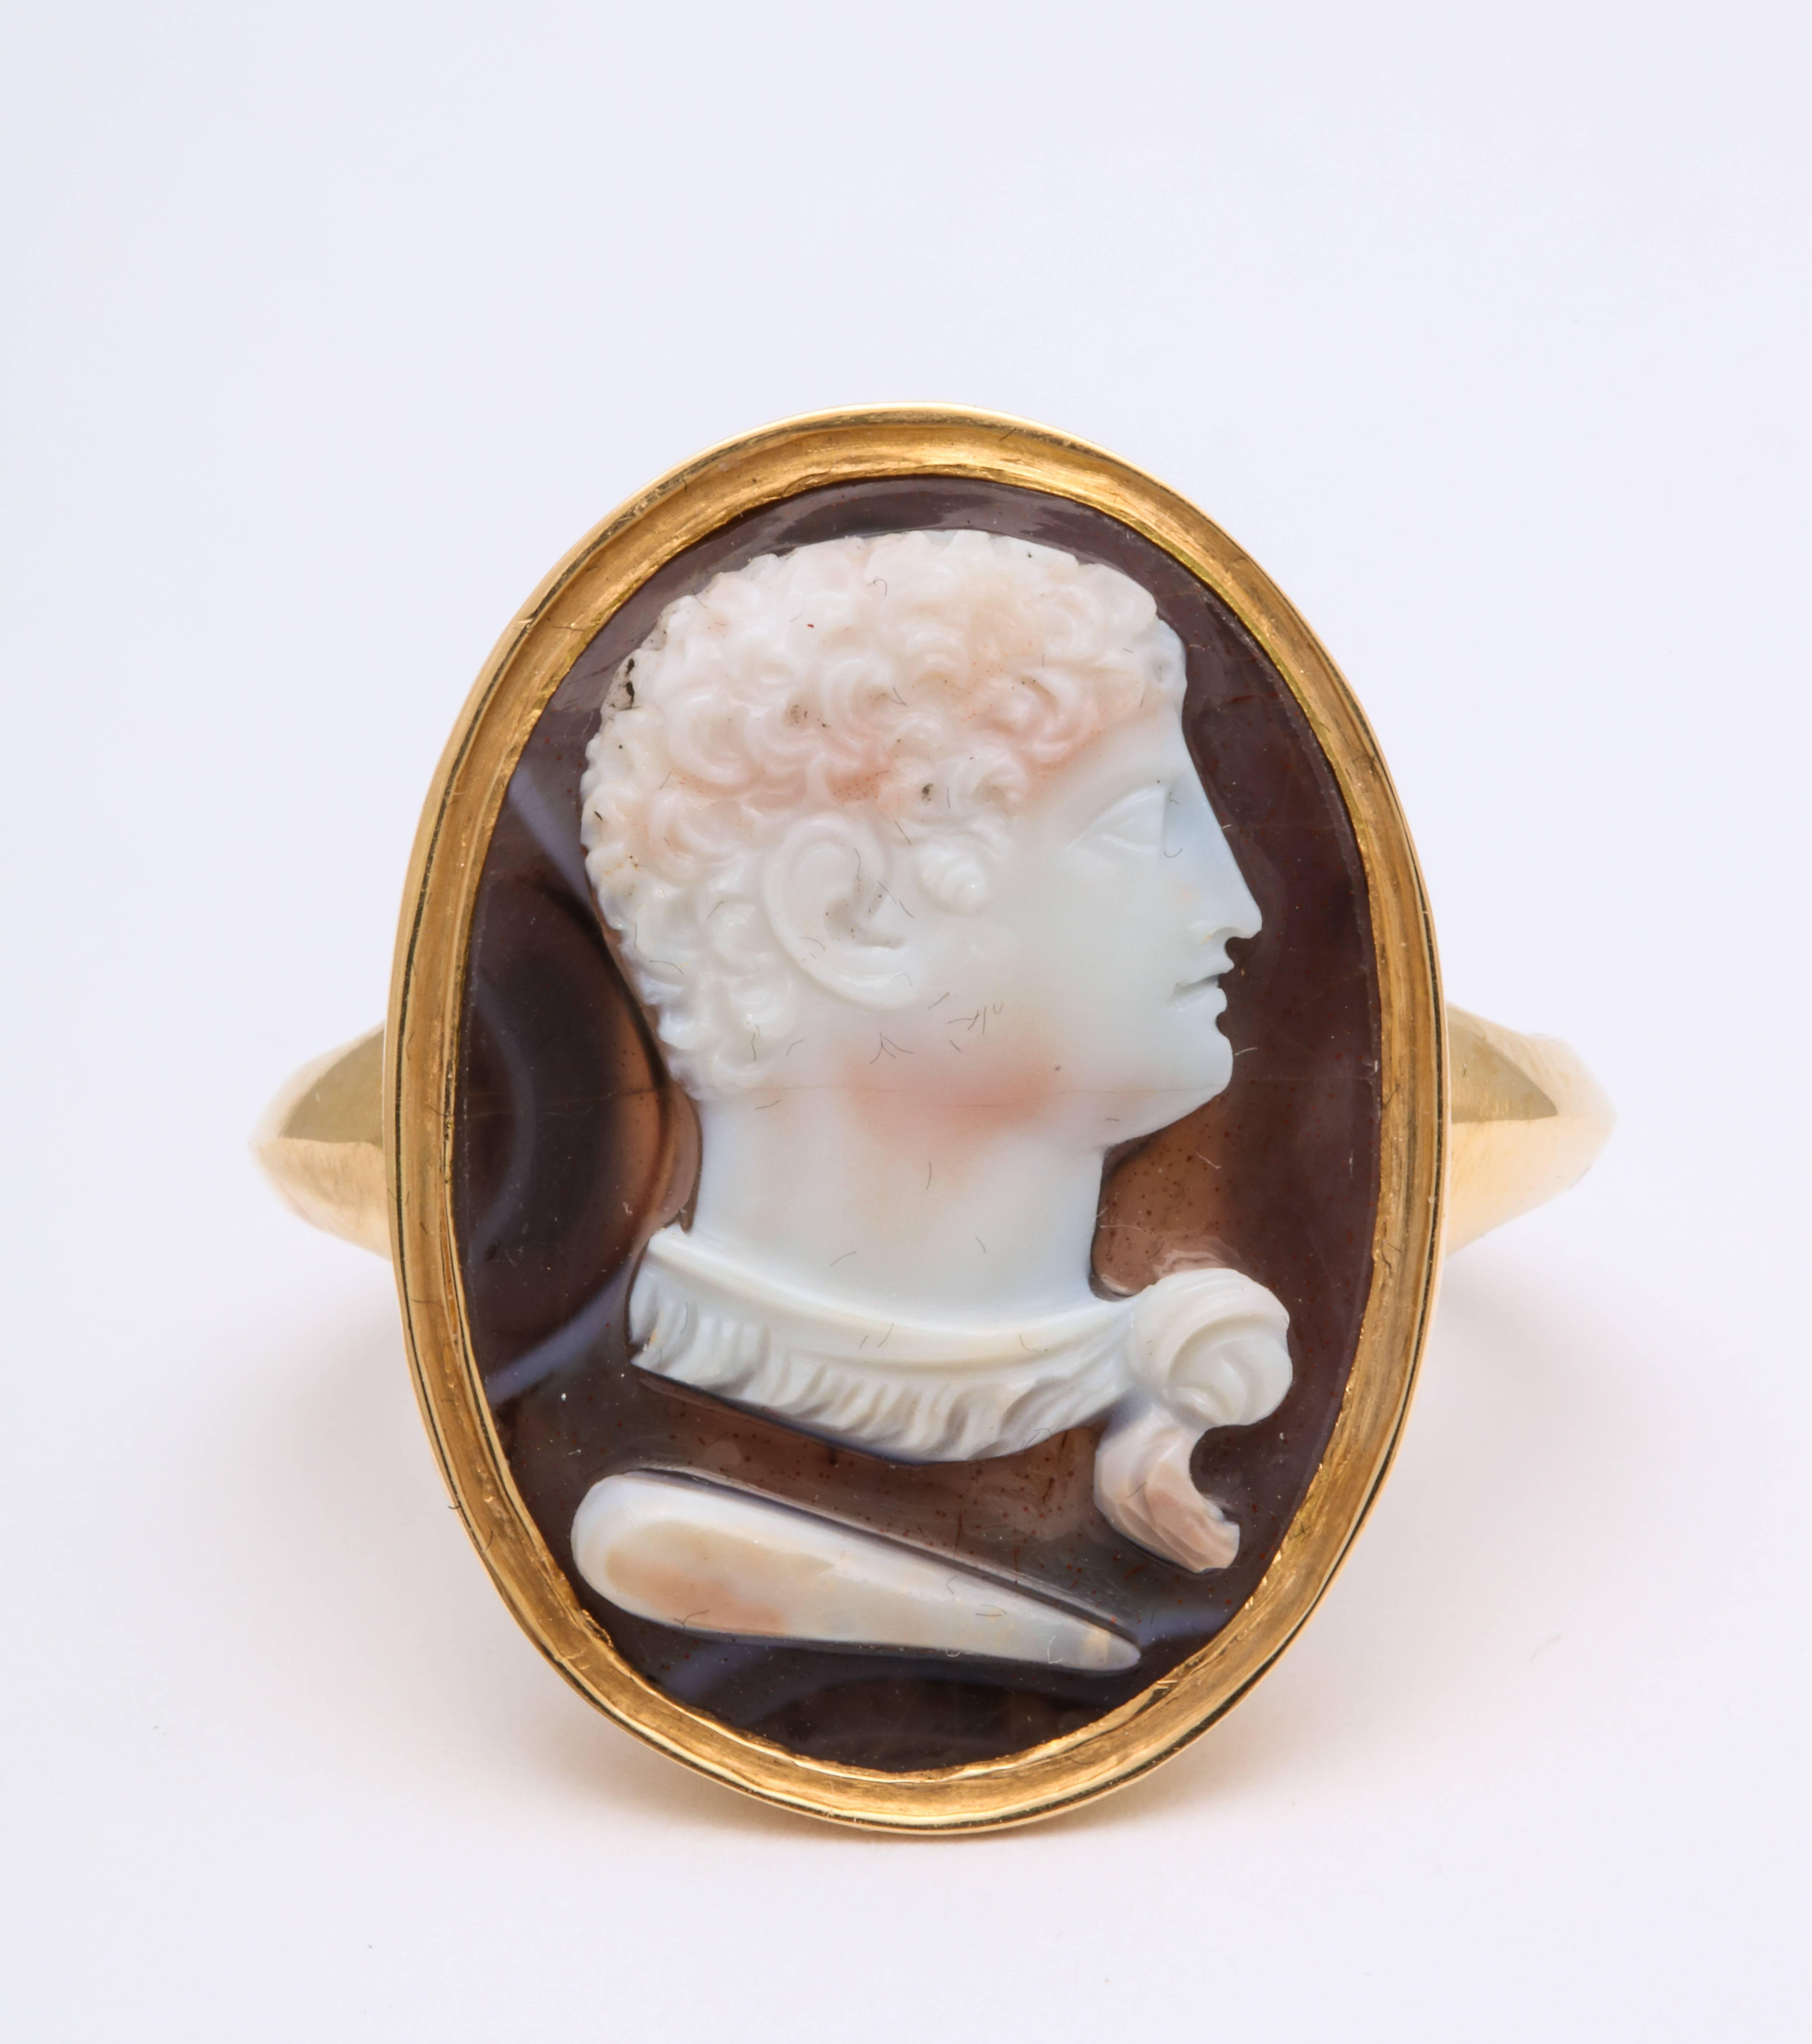 Everything about this ring speaks of power, as Hercules, famed for his strength, appears in f carved in three strata on this 18 kt hard stone cameo ring c. 1820. The hero appears in with his attributes of a club and lion pelt that he wears wrapped